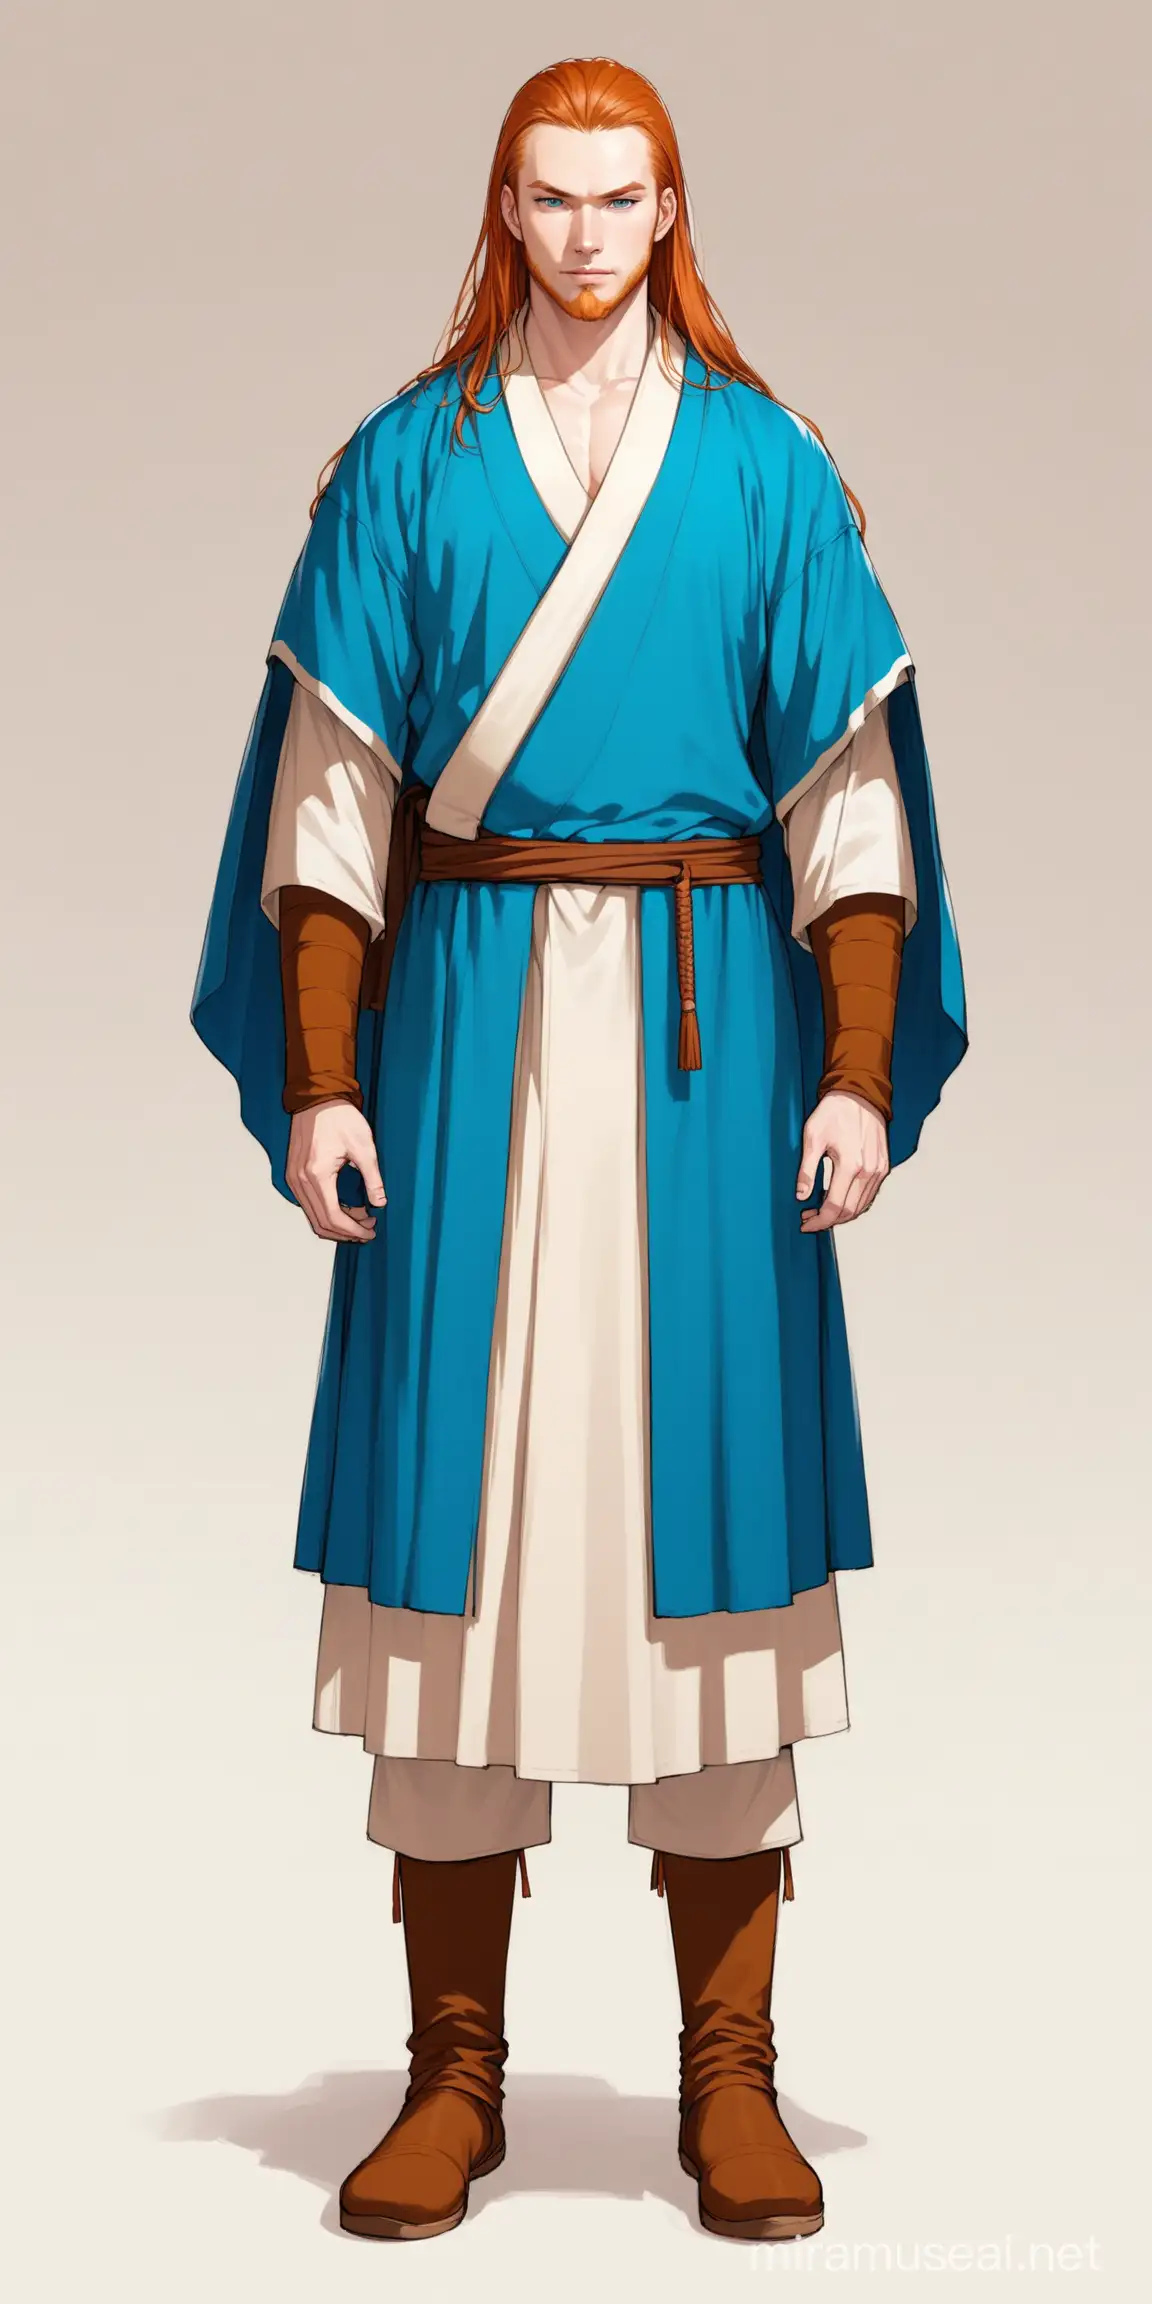 Caucasian Warrior Monk in Blue and White Robe Stands Firmly